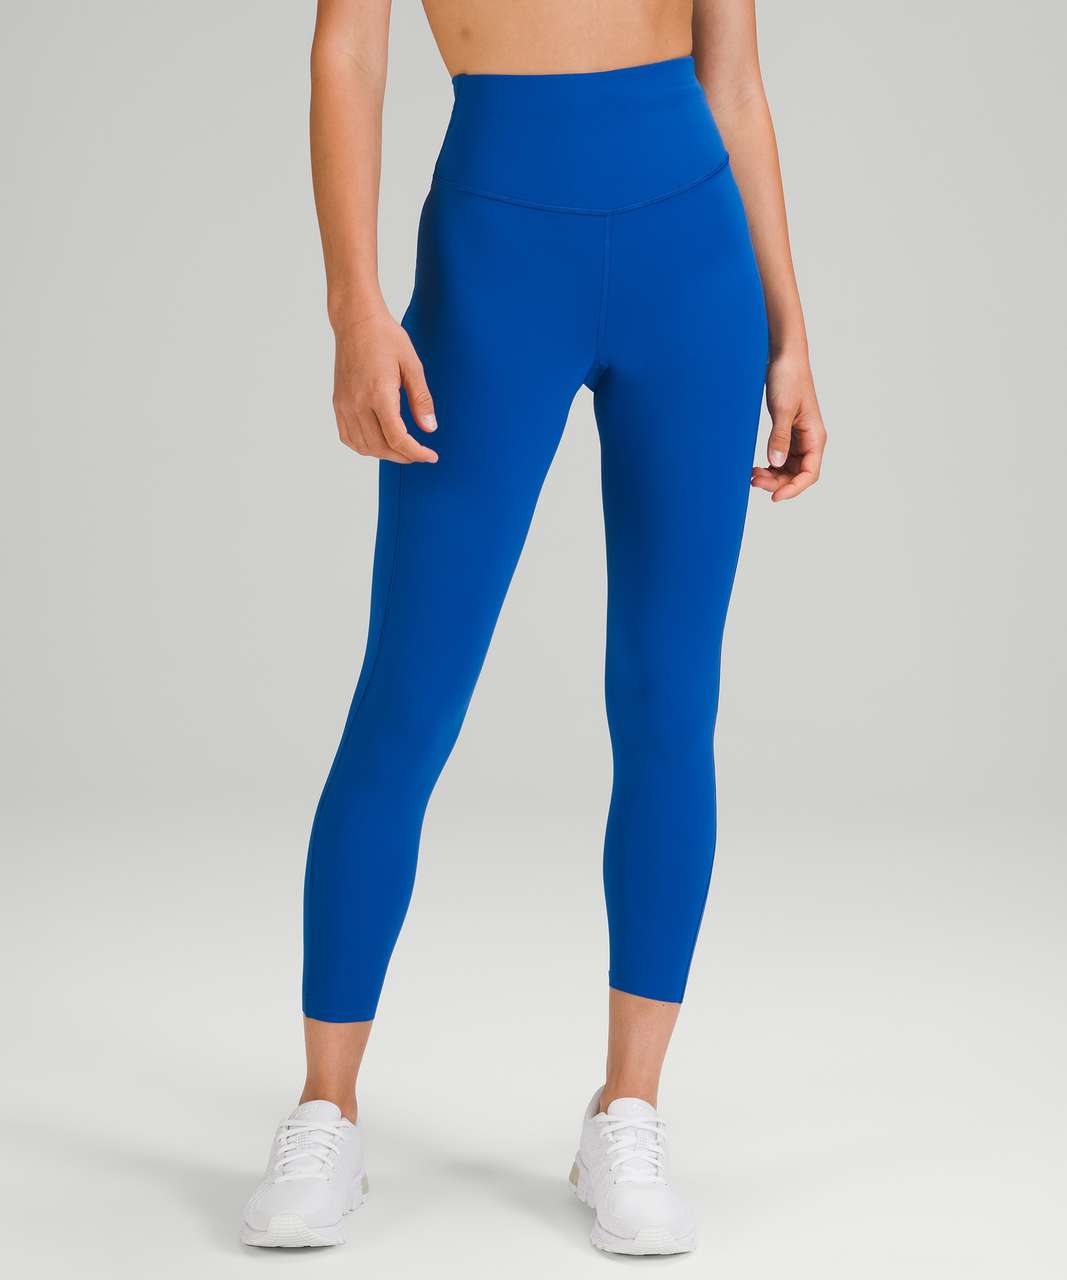 Lululemon athletica Base Pace High-Rise Tight 25, Women's Leggings/Tights